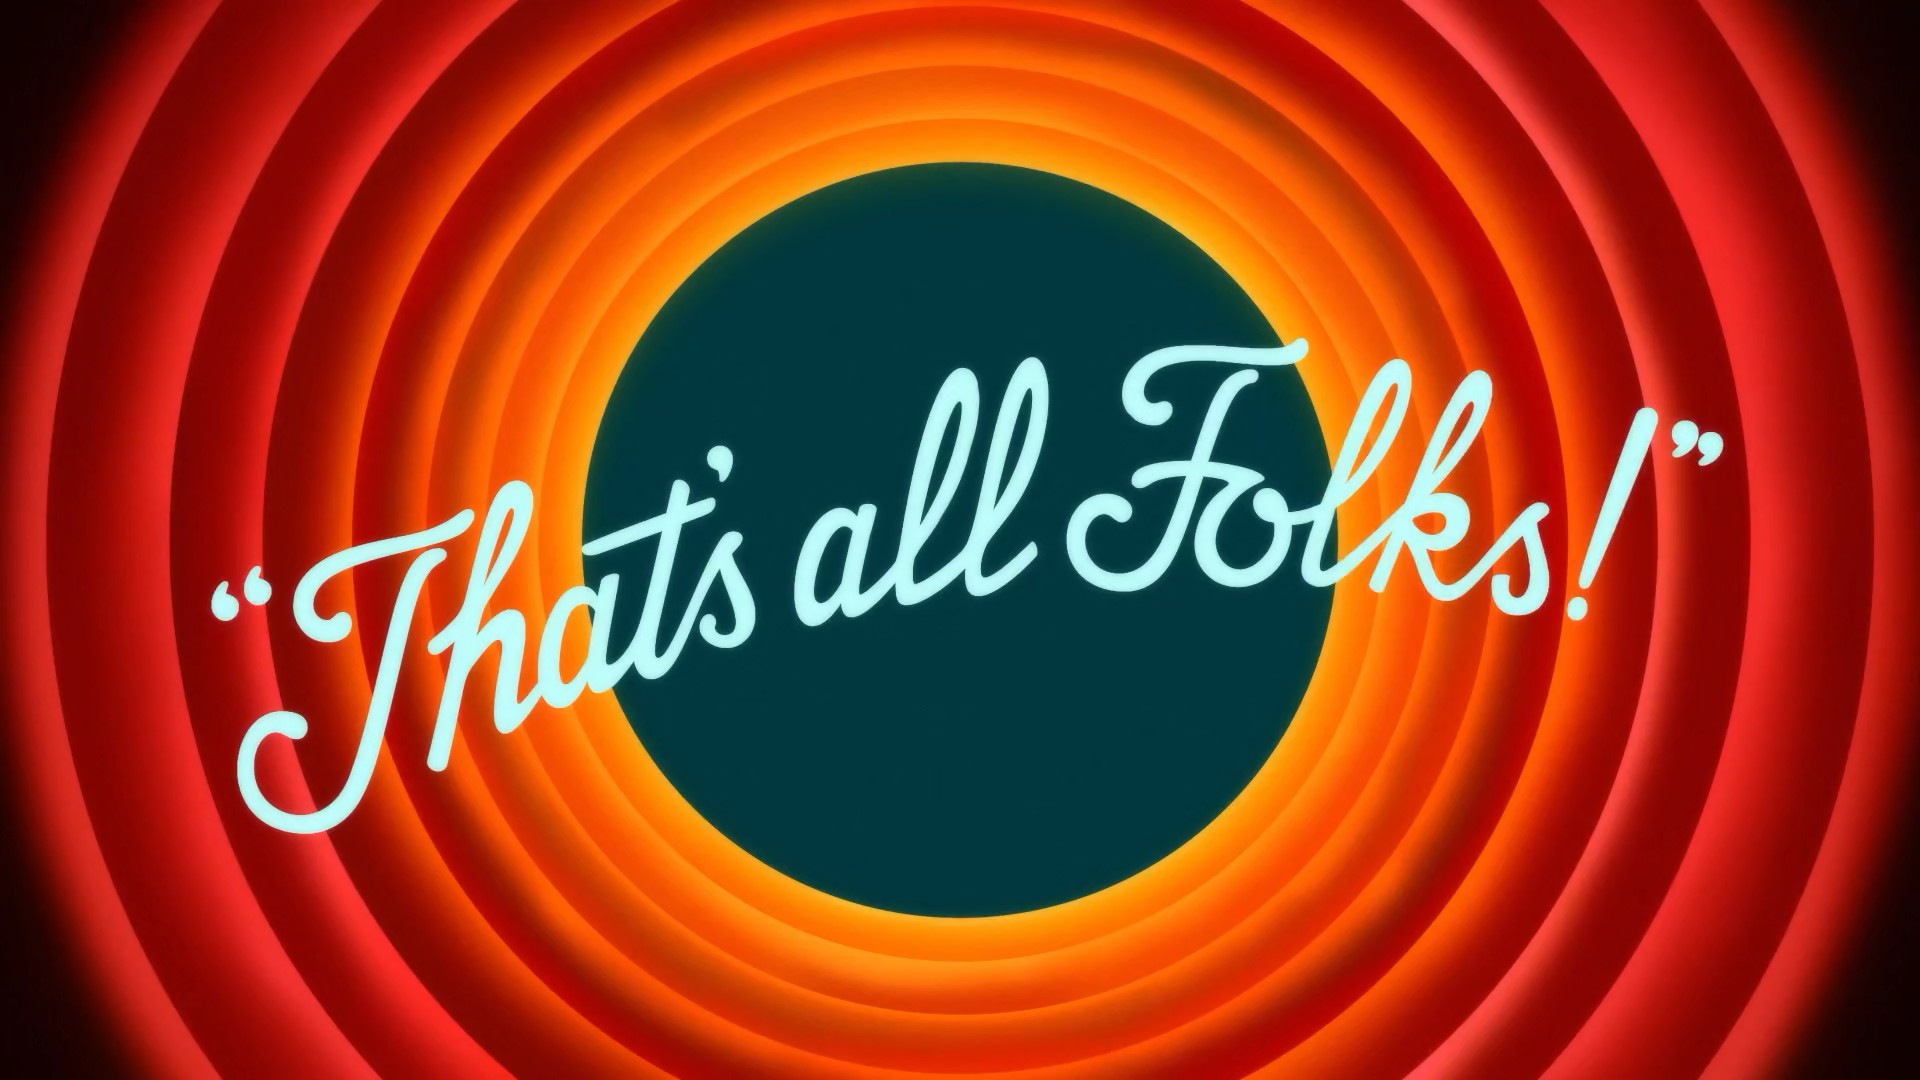 Download Free Thats All Folks Wallpapers